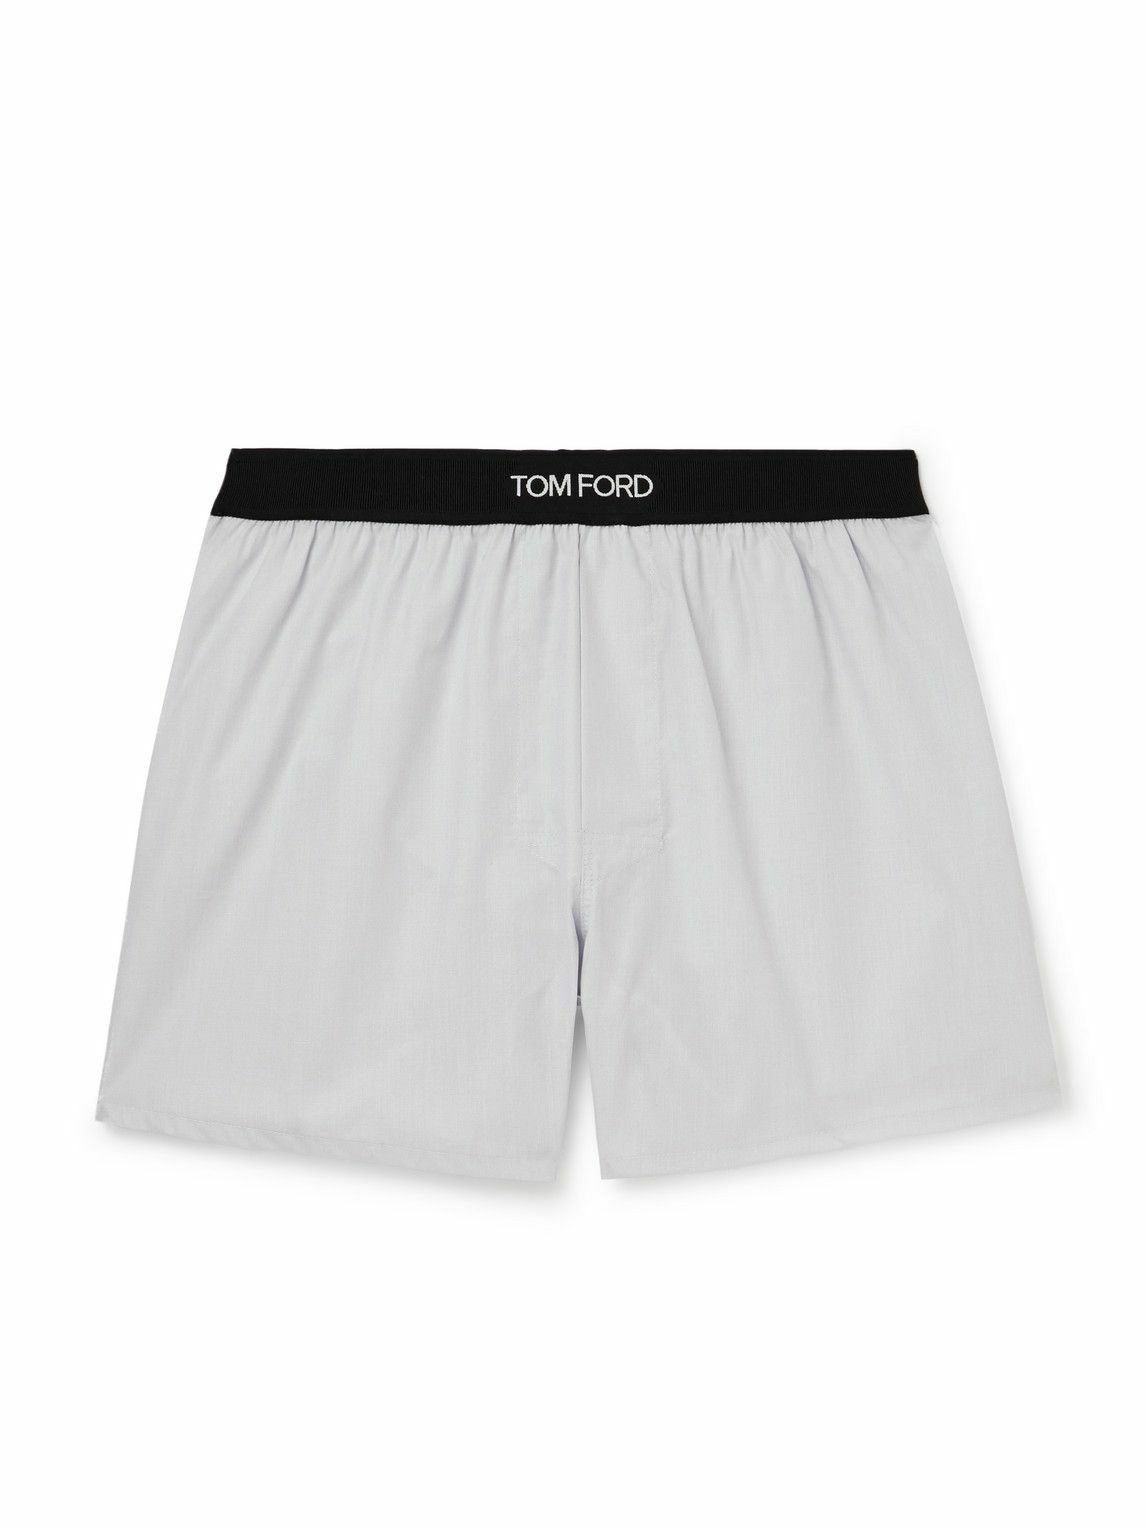 TOM FORD - Cotton Boxer Shorts - Gray TOM FORD